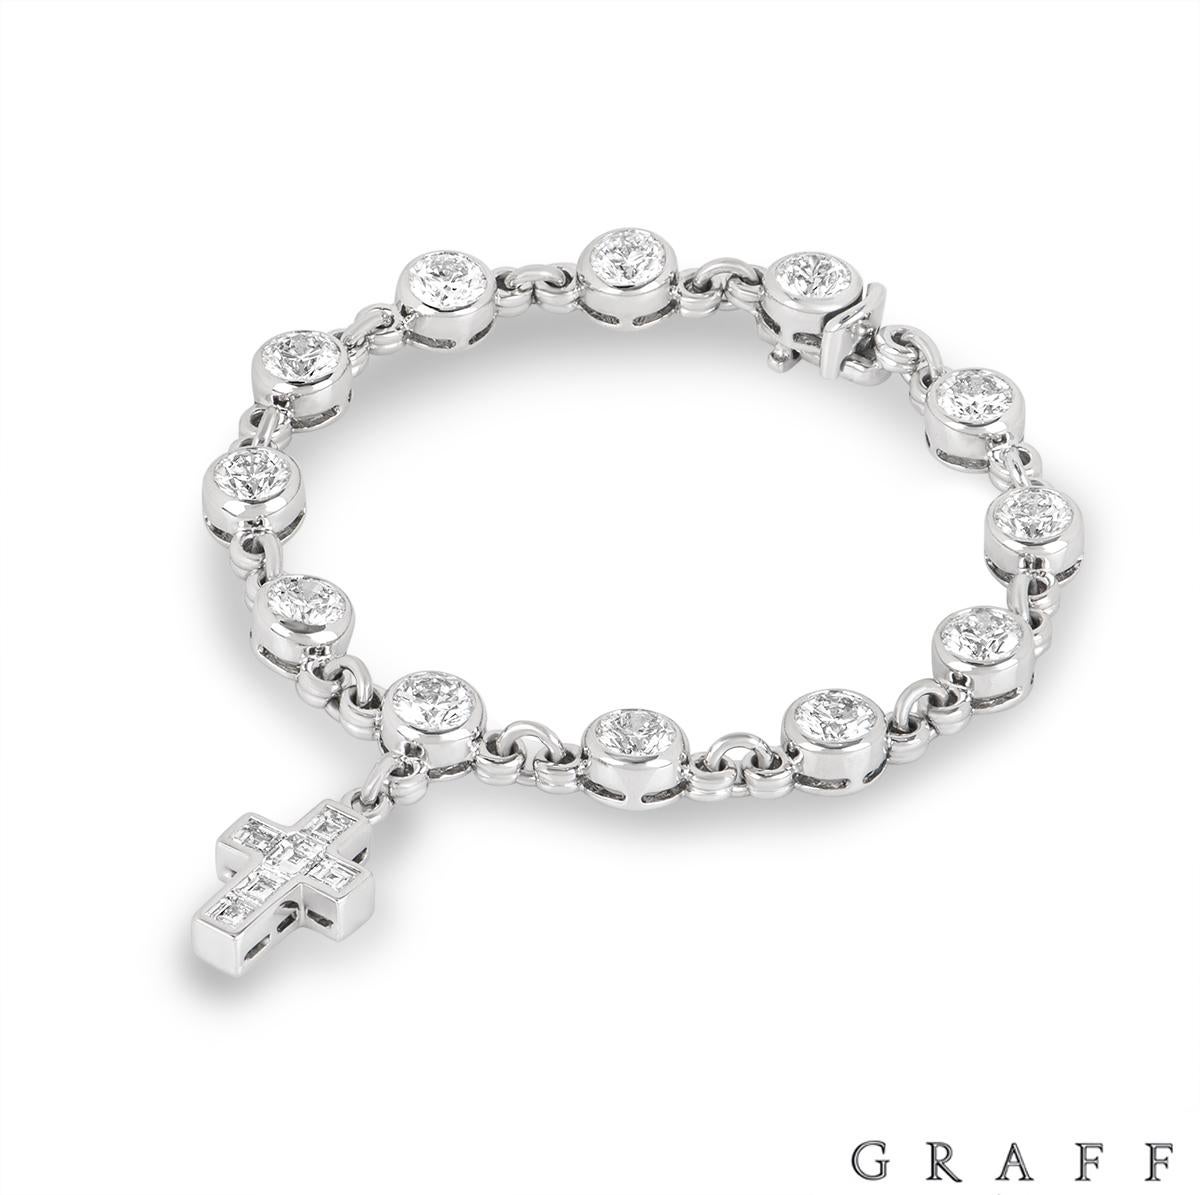 A unique 18k white gold diamond bracelet by Graff. The bracelet features 12 round brilliant cut diamonds in a bezel set mount, evenly spaced throughout. The diamonds have an approximate weight of 9.60ct, E-F colour and VVS-VS clarity. The line